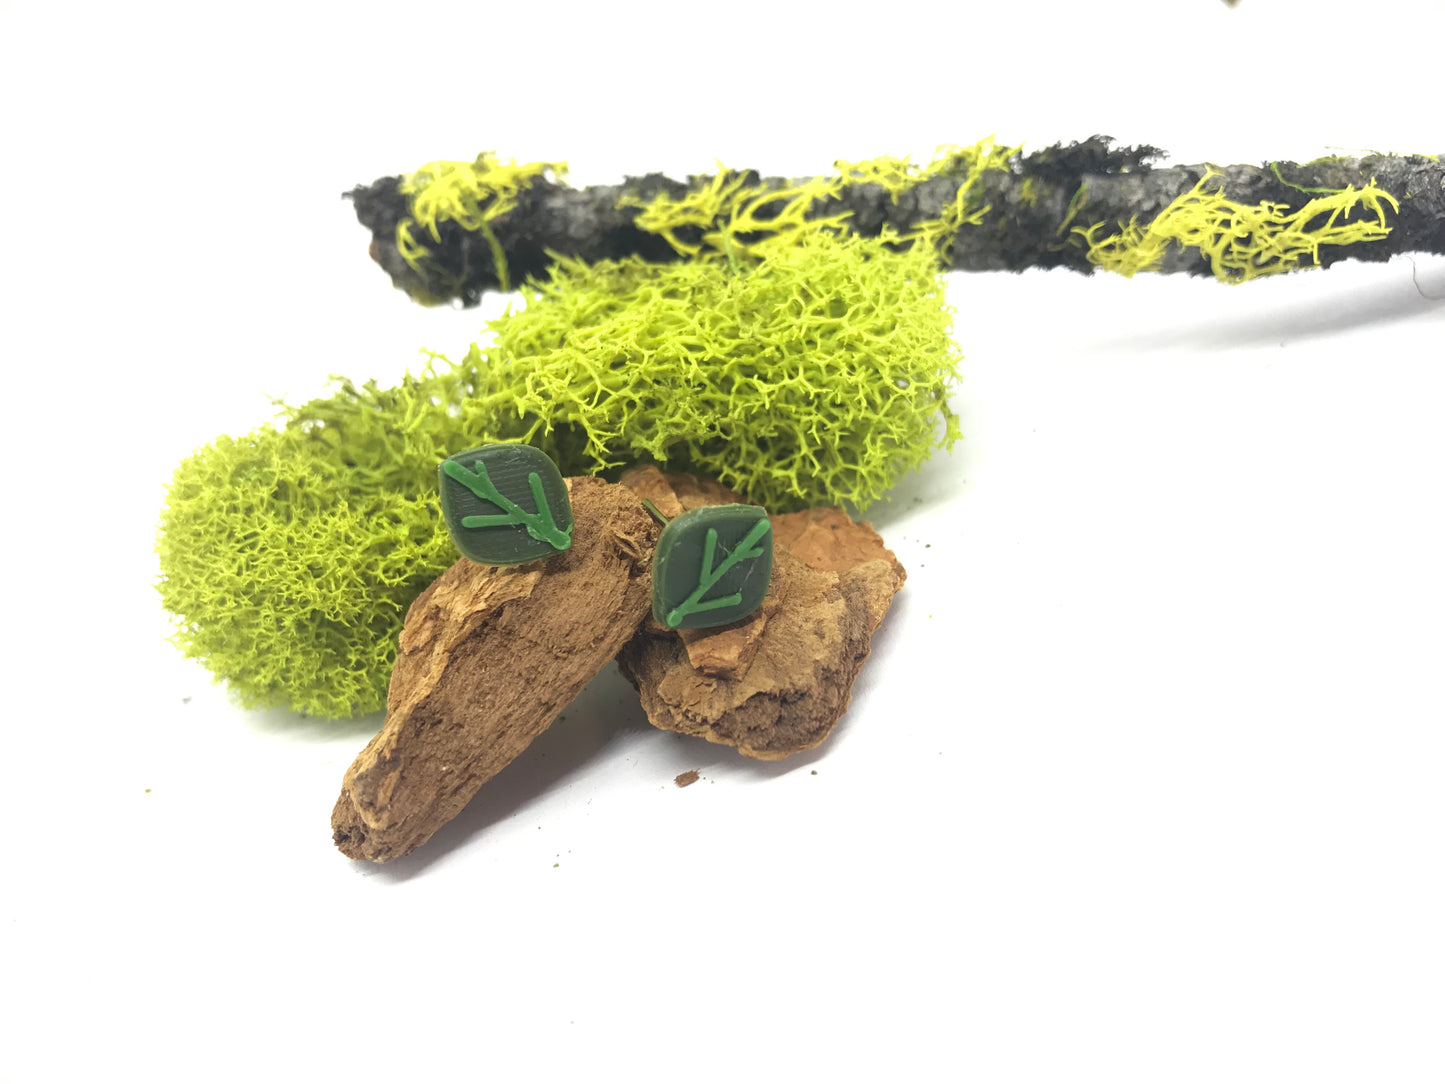 In a stark white frame, there is a stick, moss, and small pieces of wood. Resting on the wood are two R+D earring studs that are shaped like leaves. They are dark olive green with kelly green veins.